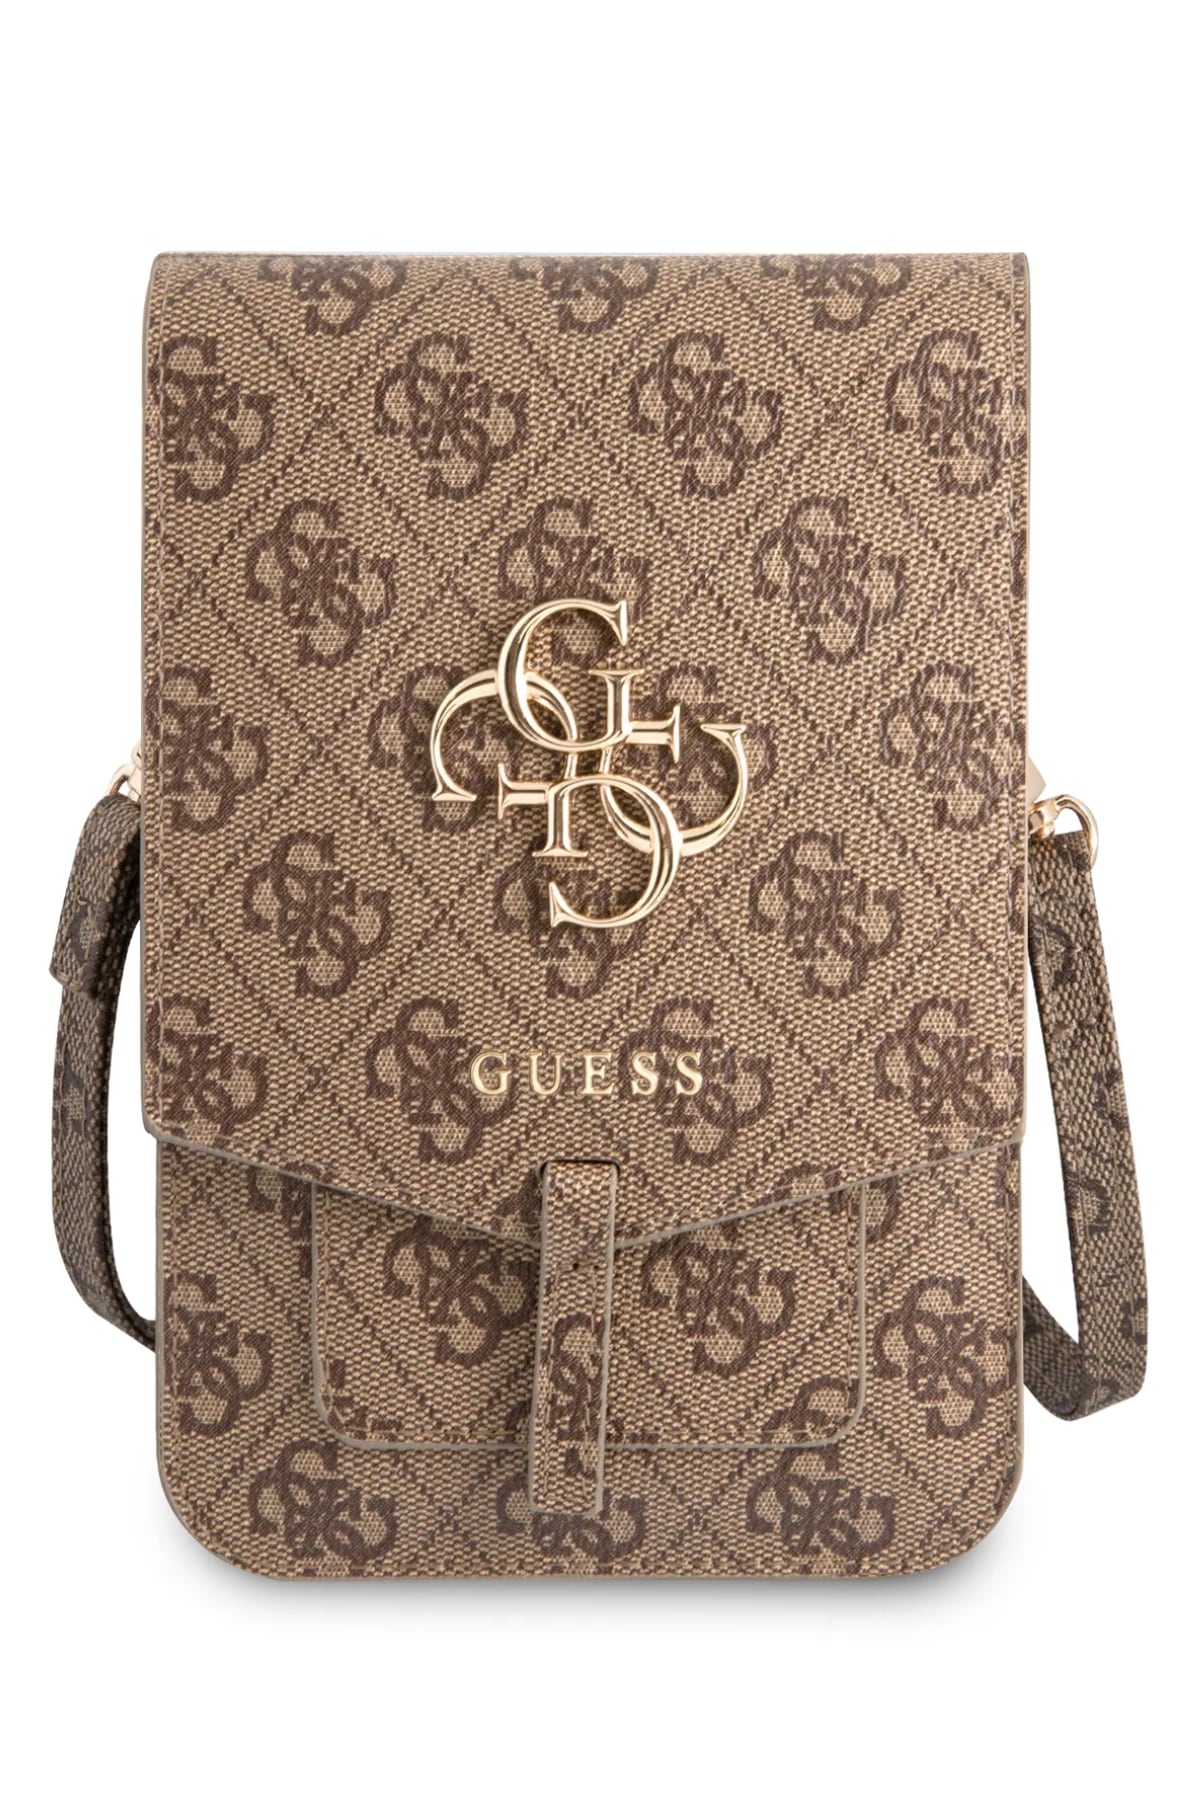 Guess 4G Logo Phone Bag Brown with Credit Card Holder 